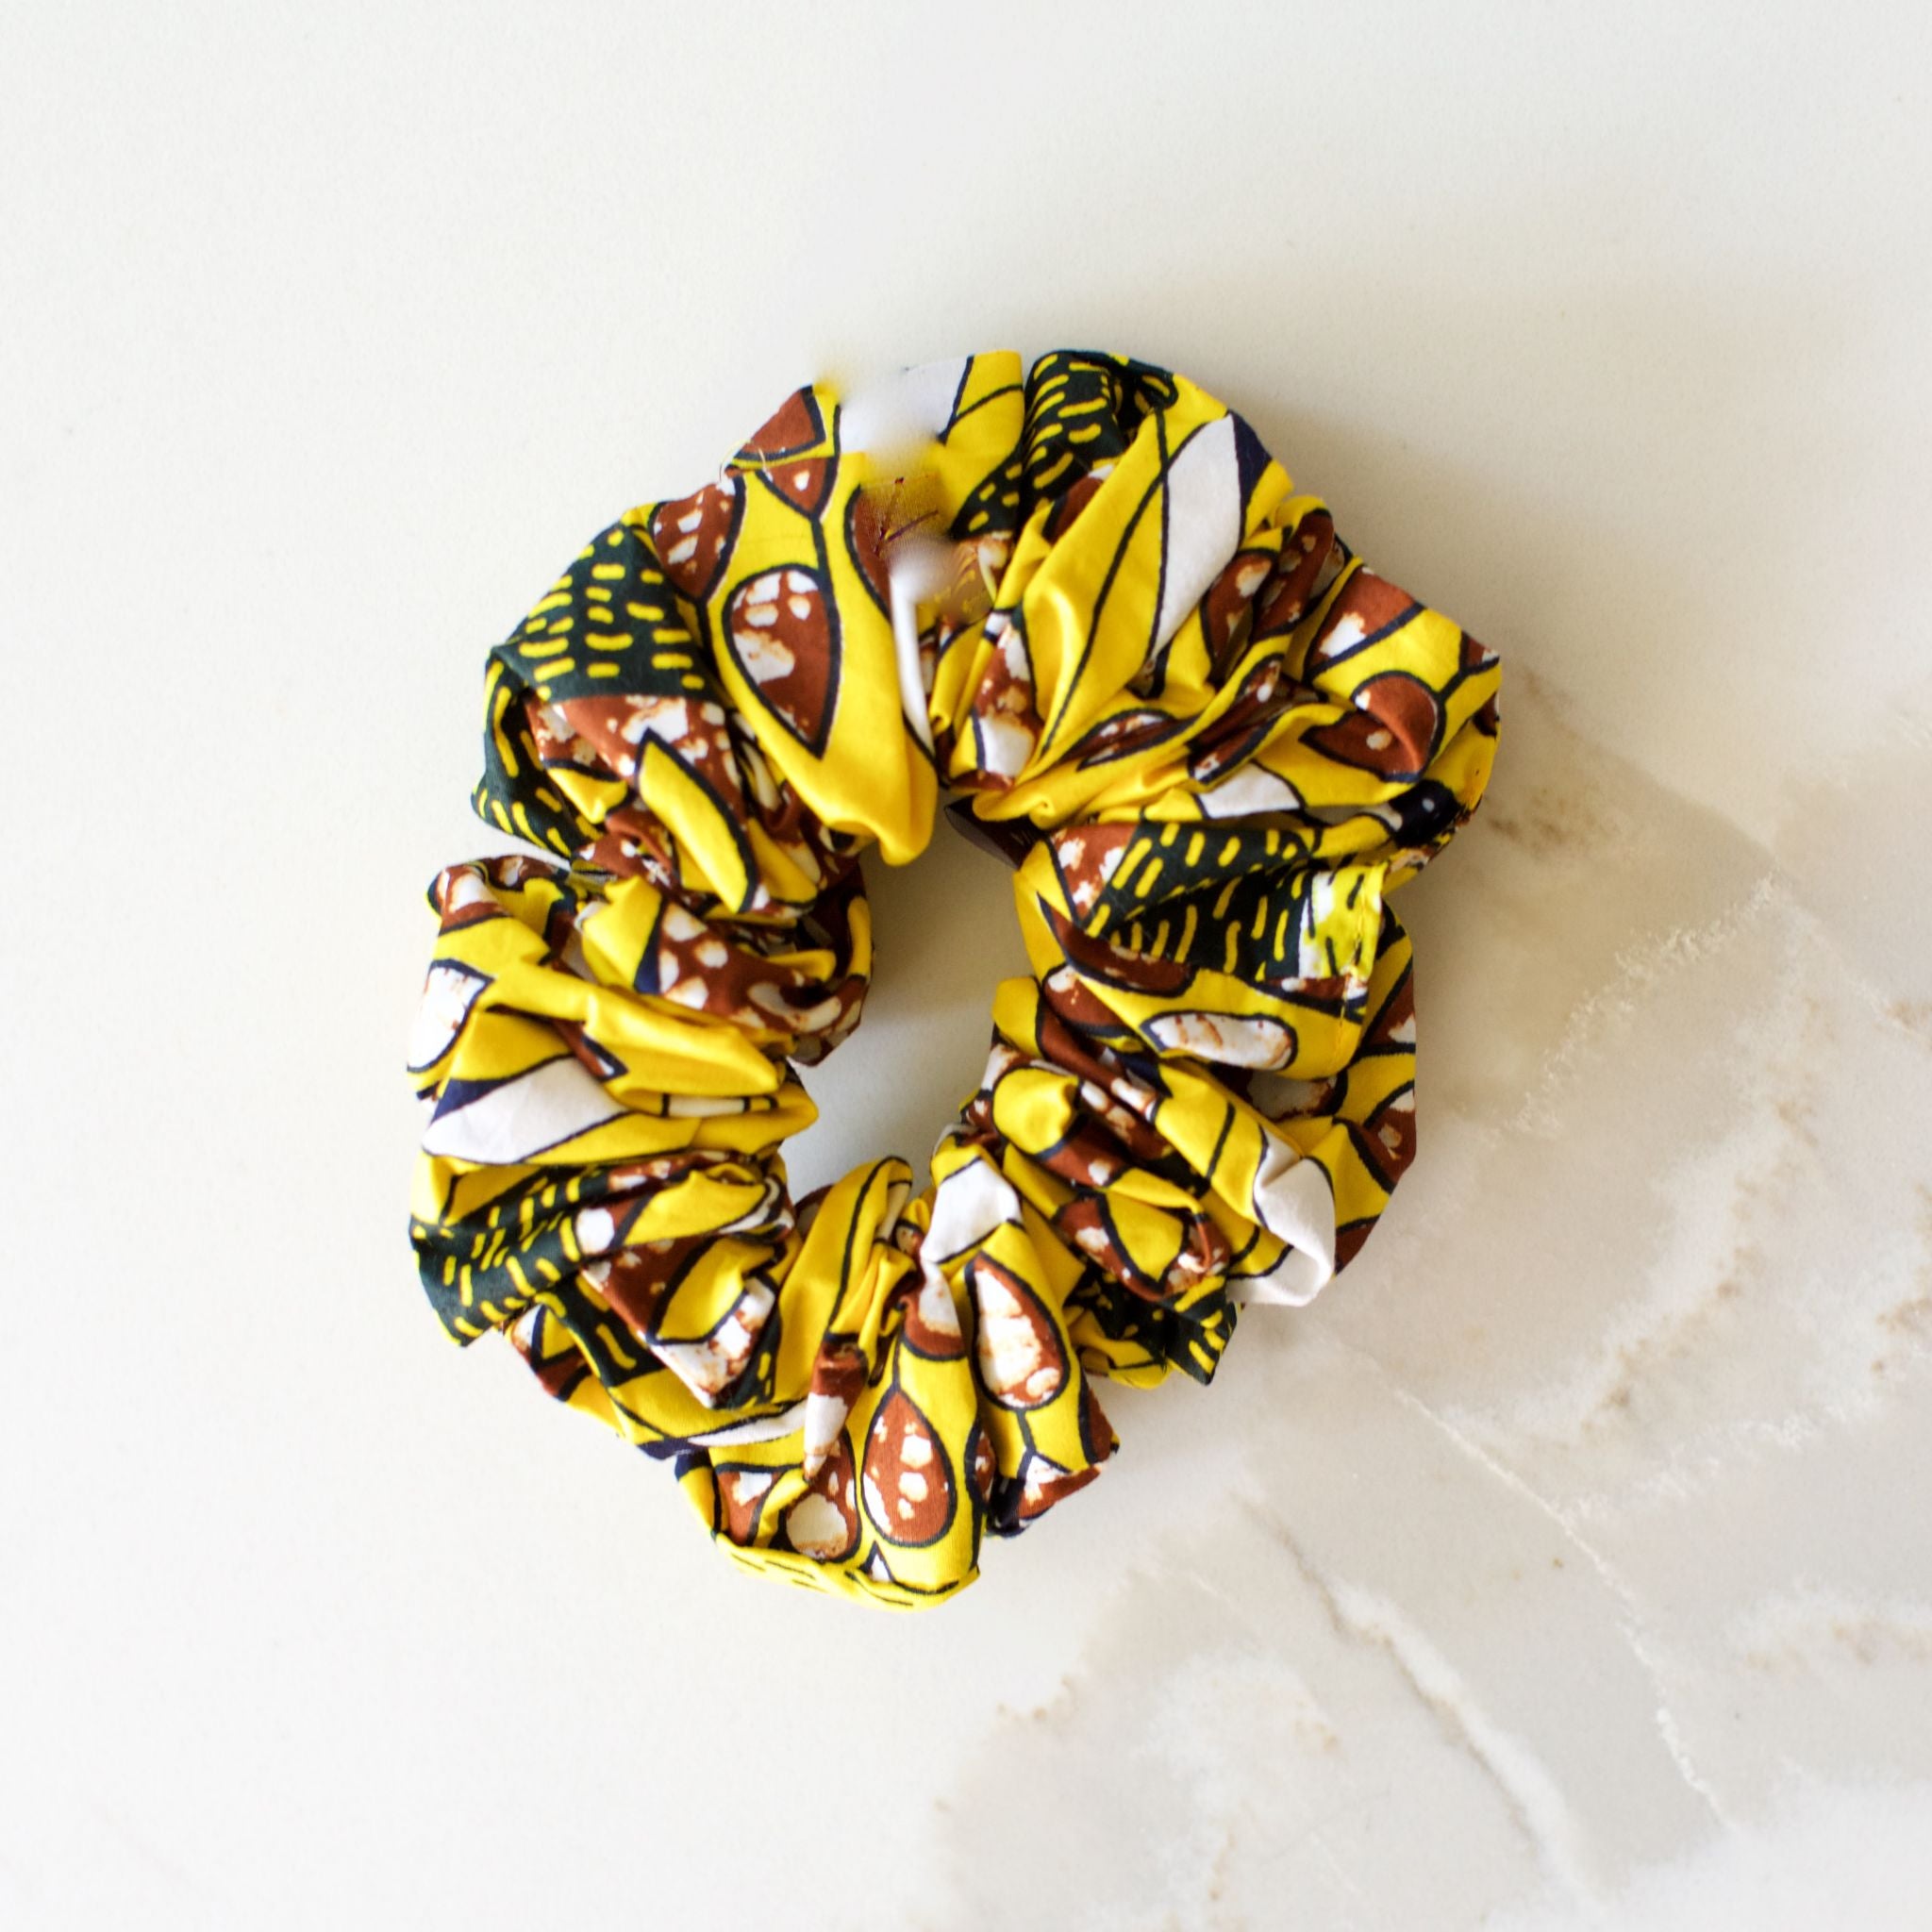 Small African Print Scrunchies